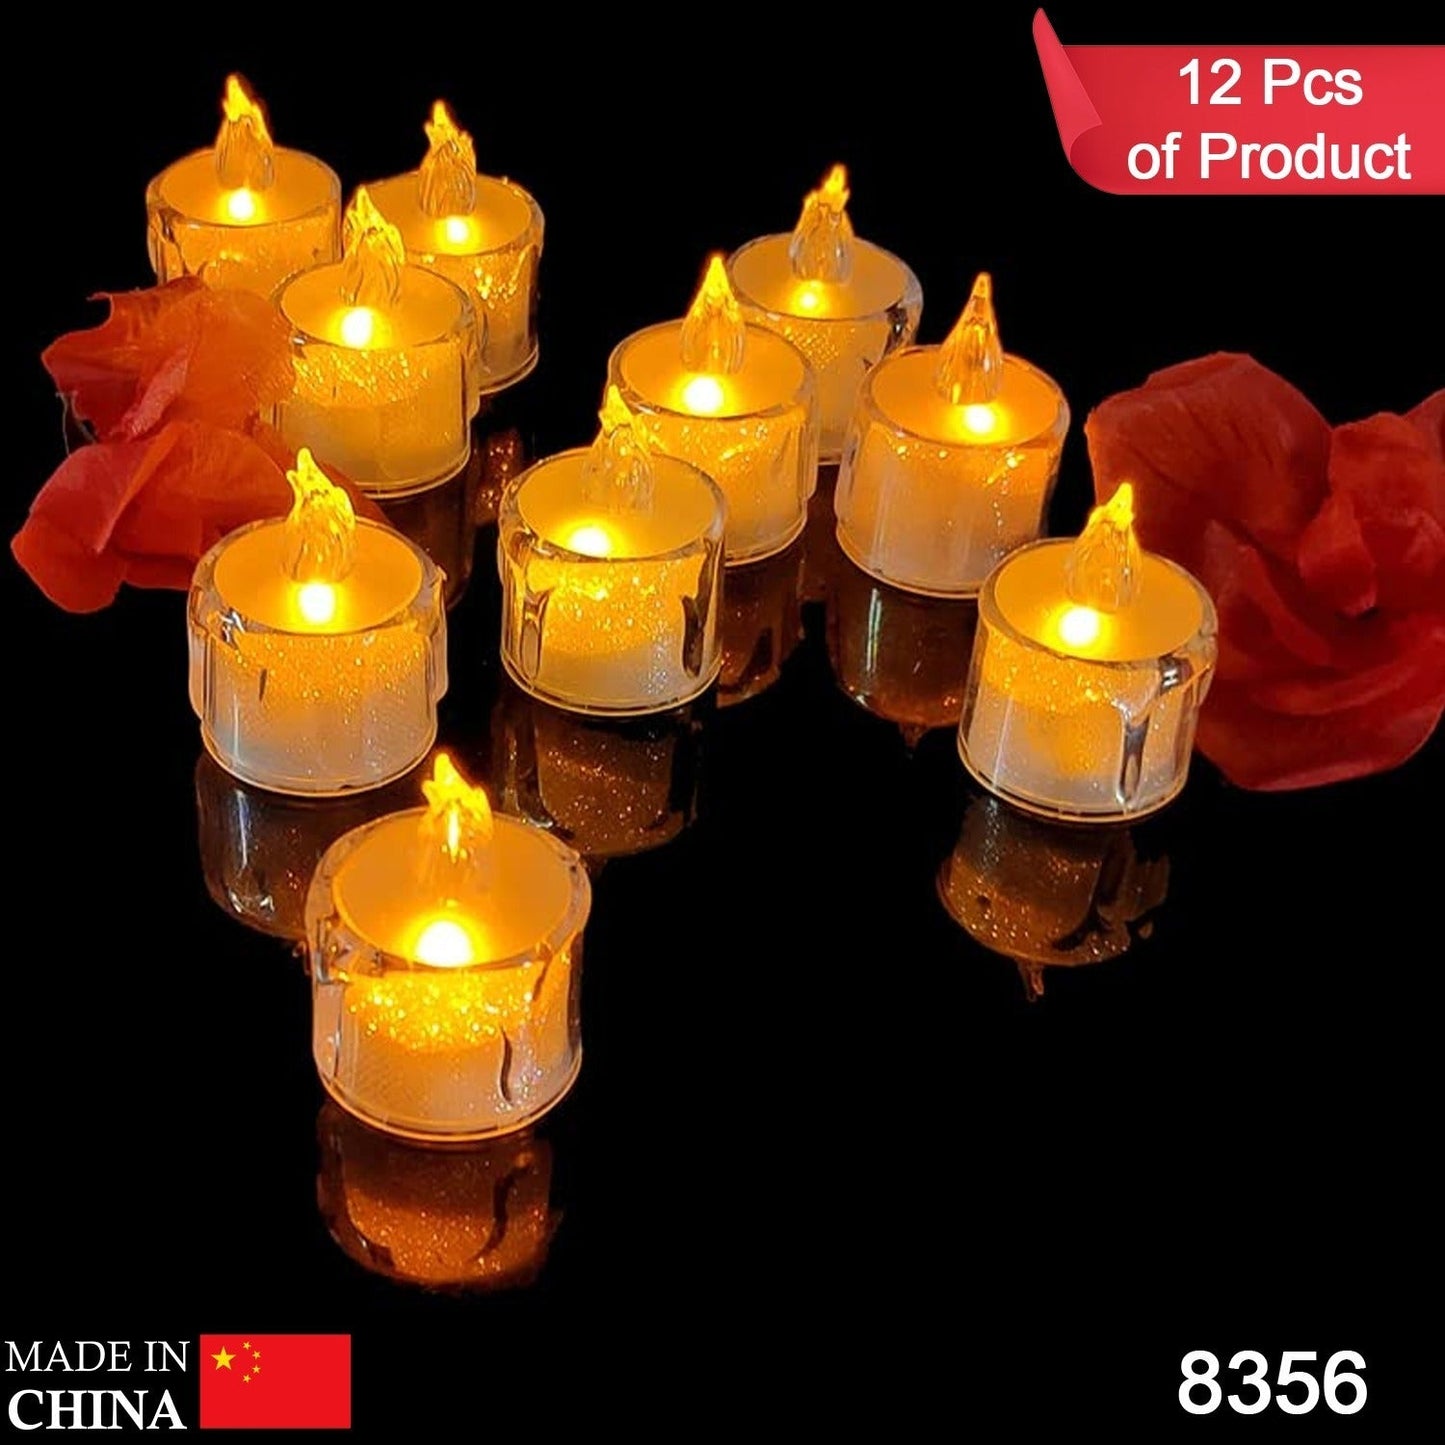 12 Pcs Flameless and Smokeless Decorative Acrylic Candles Transparent Led Tea Light Candle for Gifting, House, Diwali, Christmas, Festival, Events Decor Candles